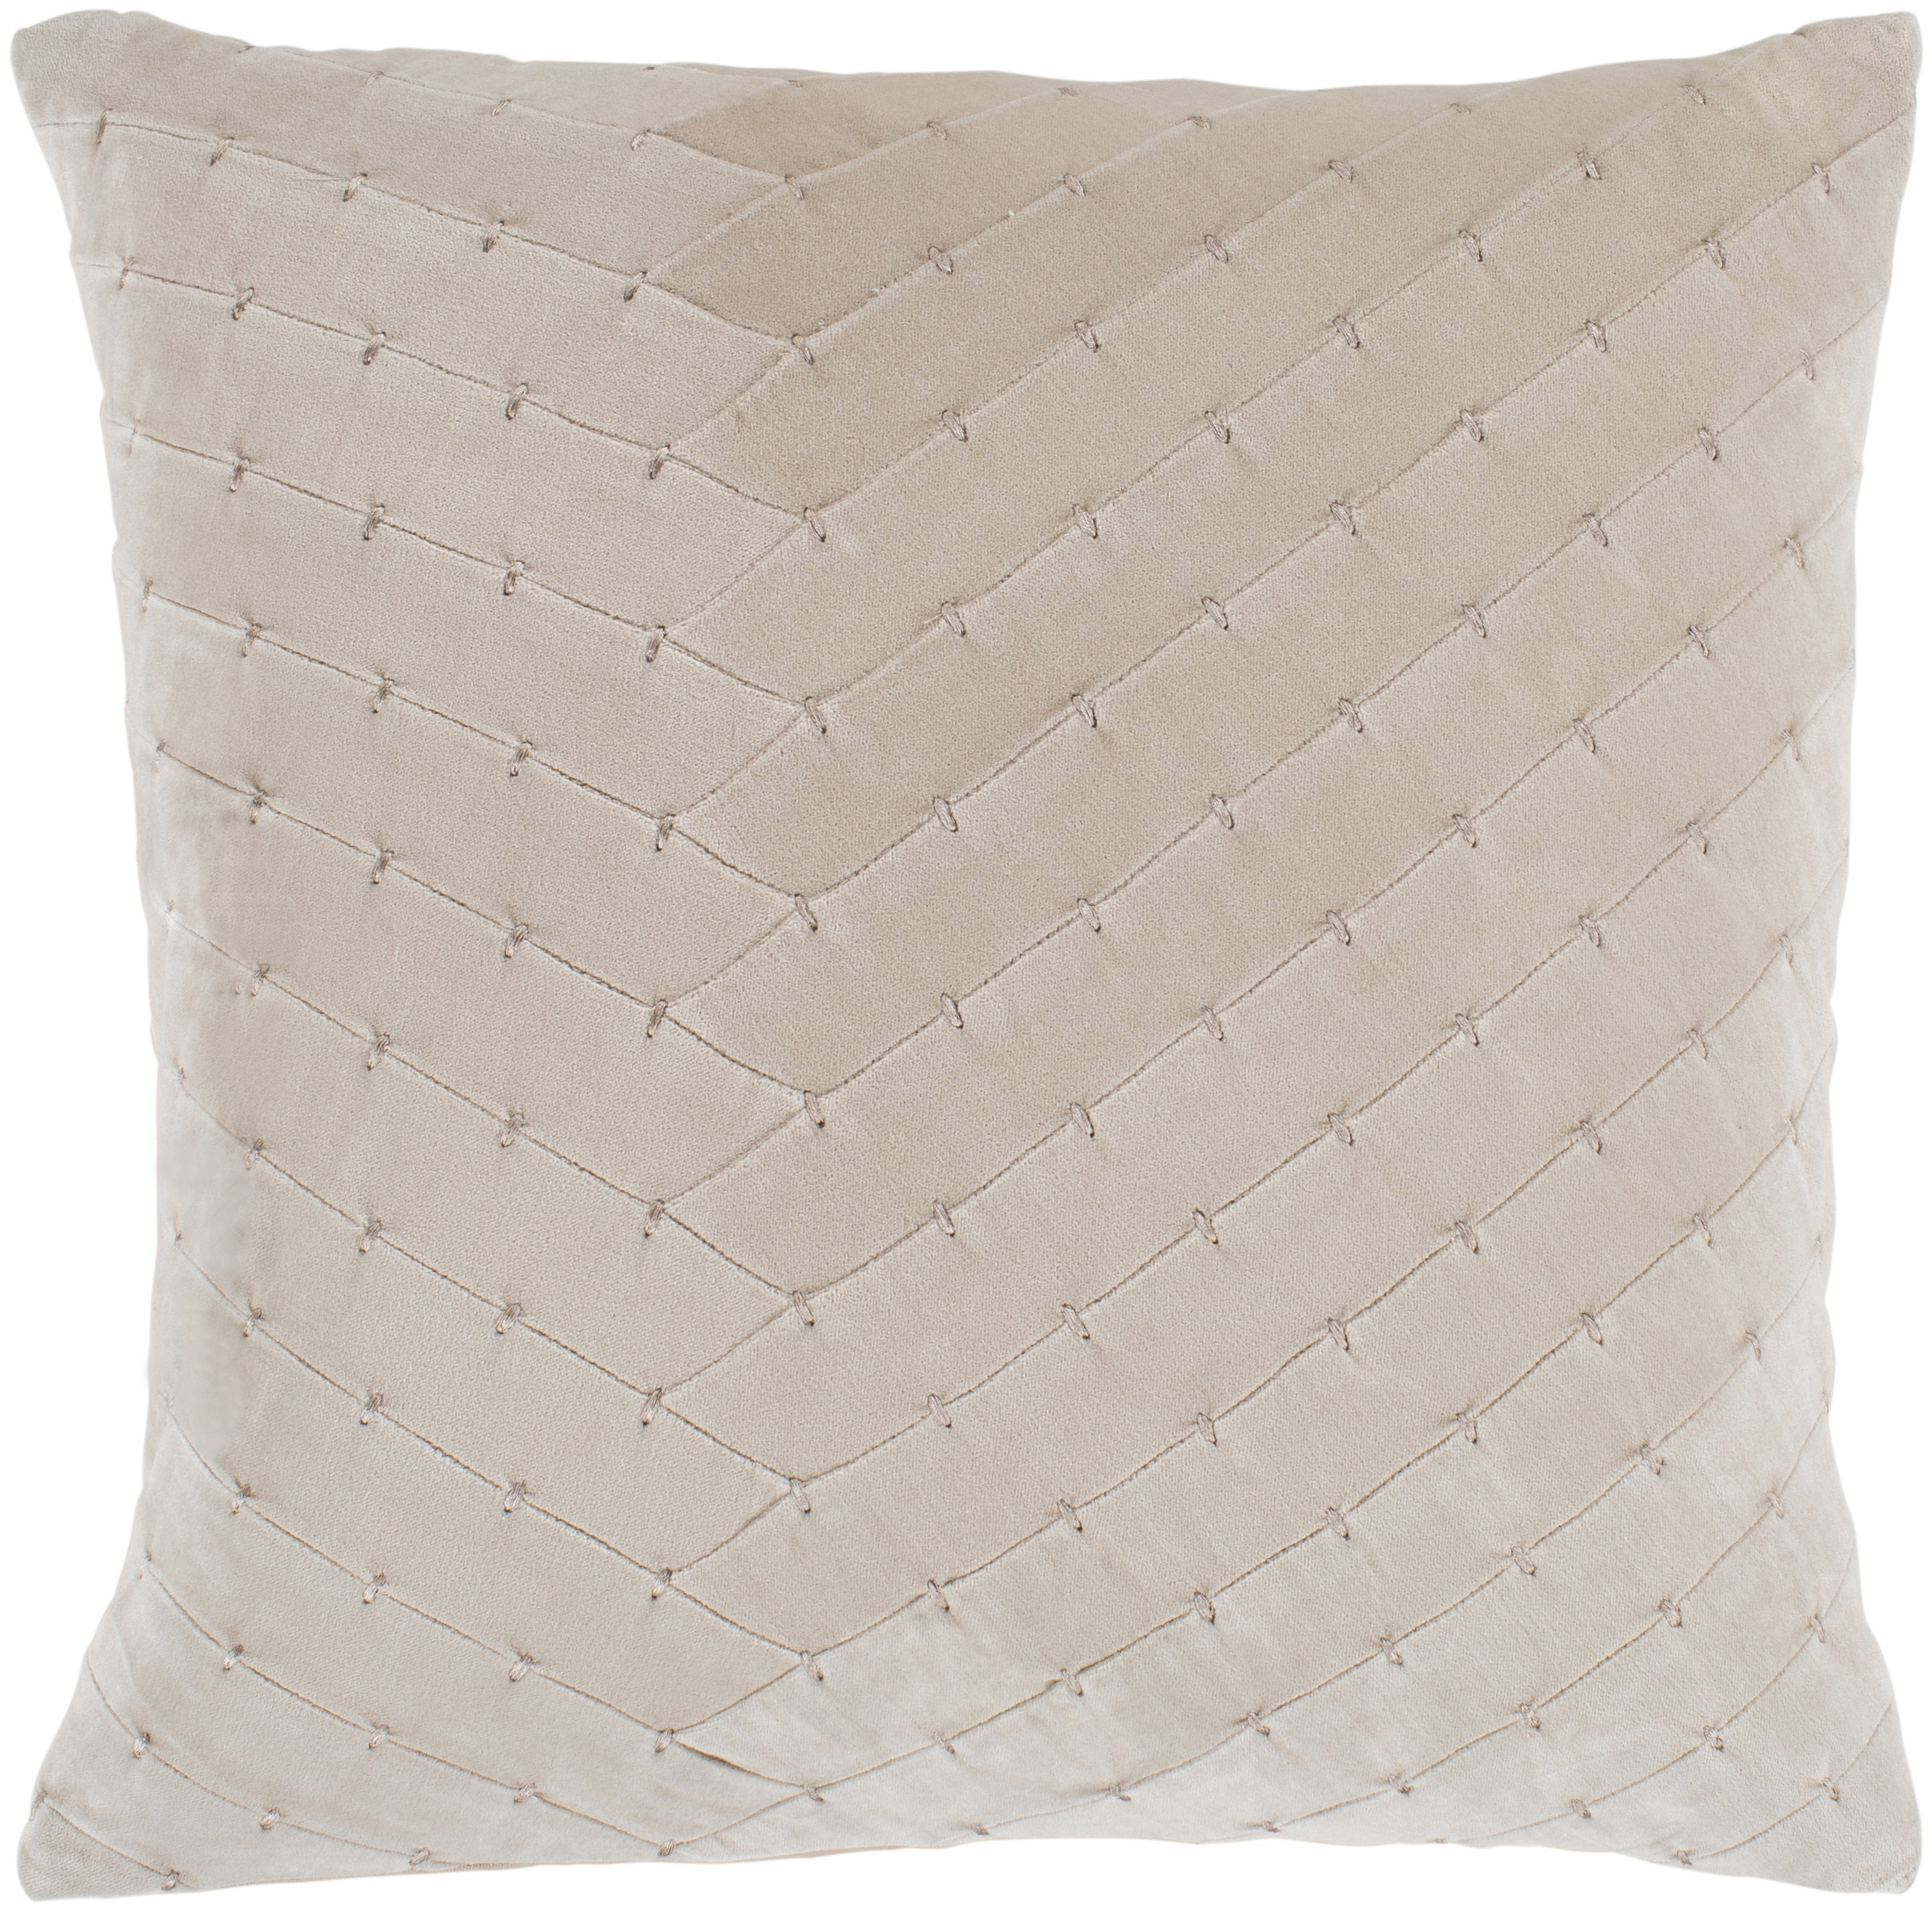 Aviana - AVA-004 - 18" x 18" - pillow cover only - Image 0